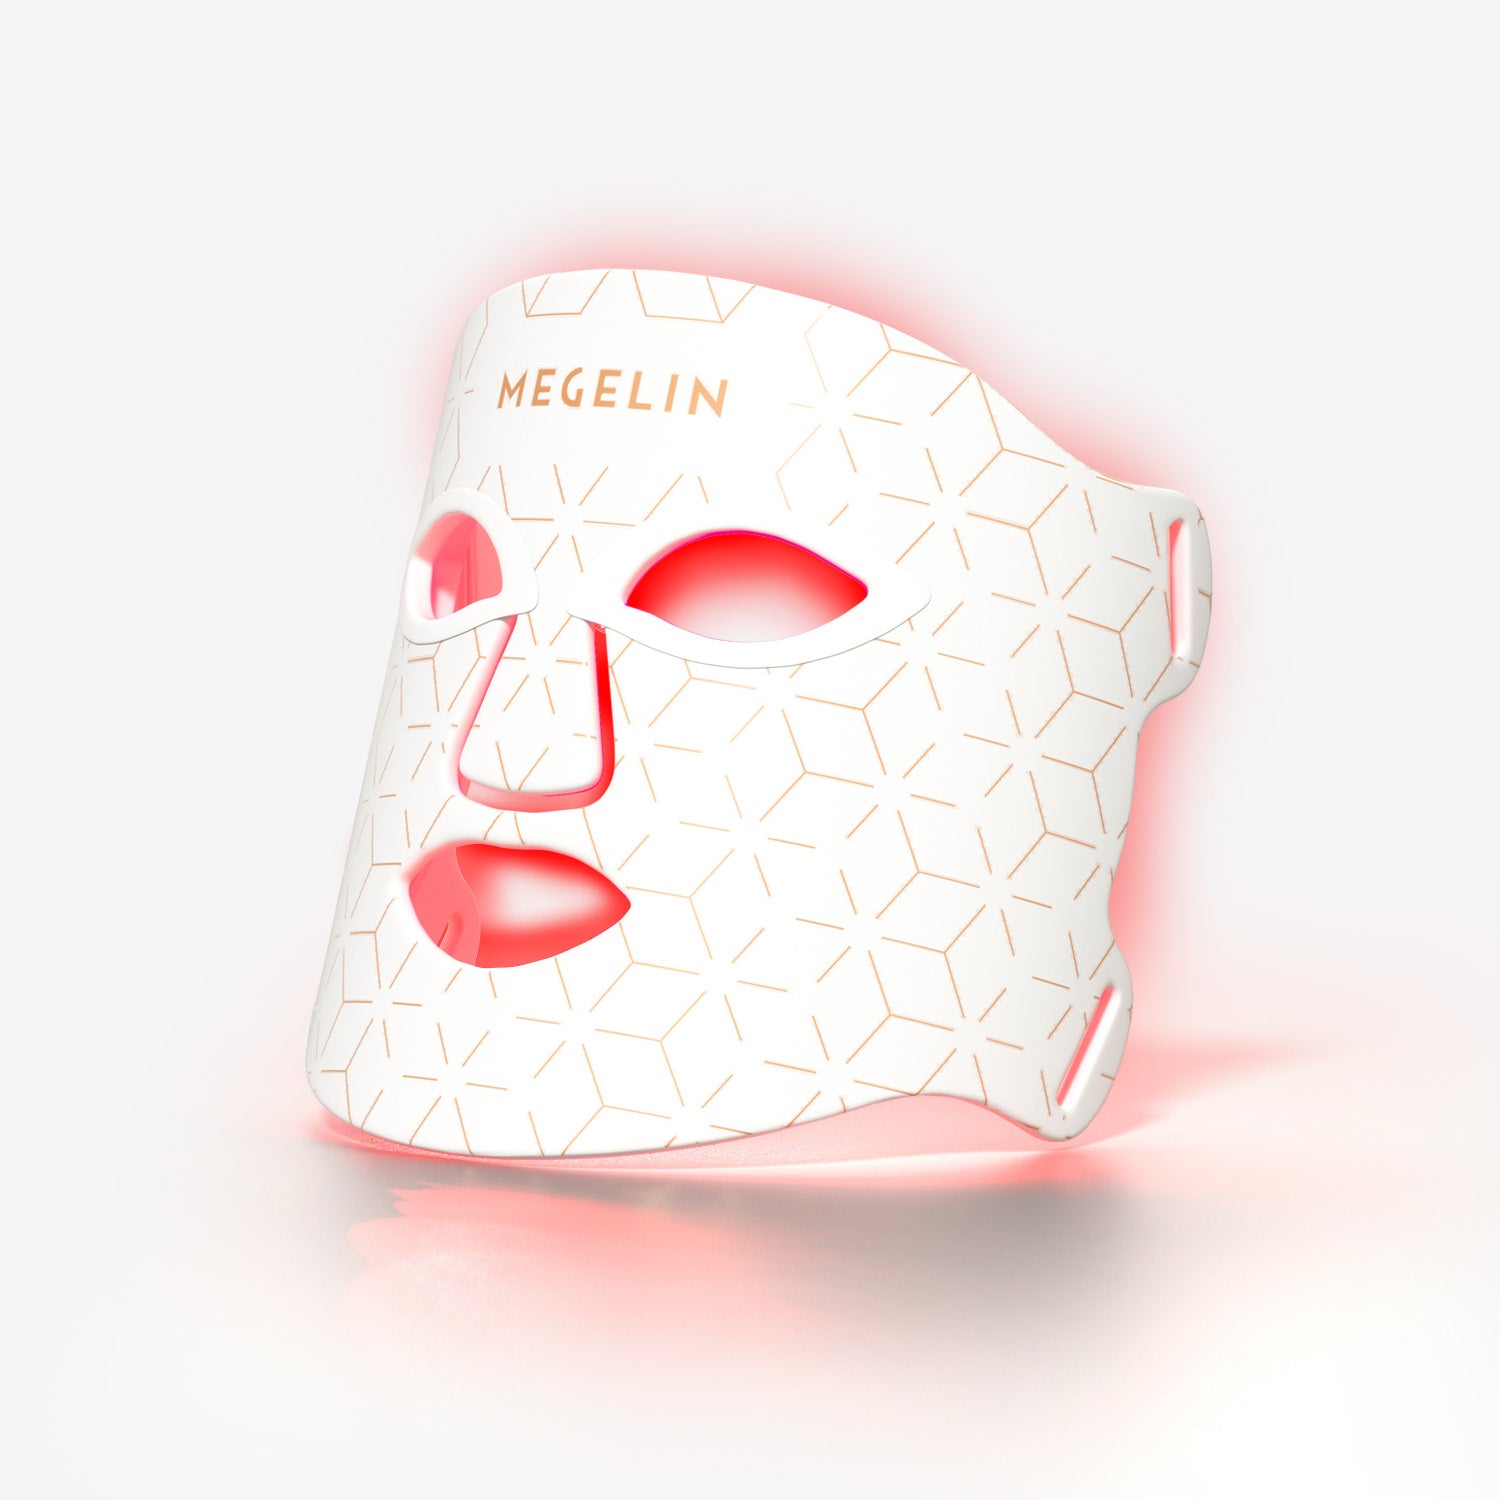 Megelin LED Light Therapy Face Mask